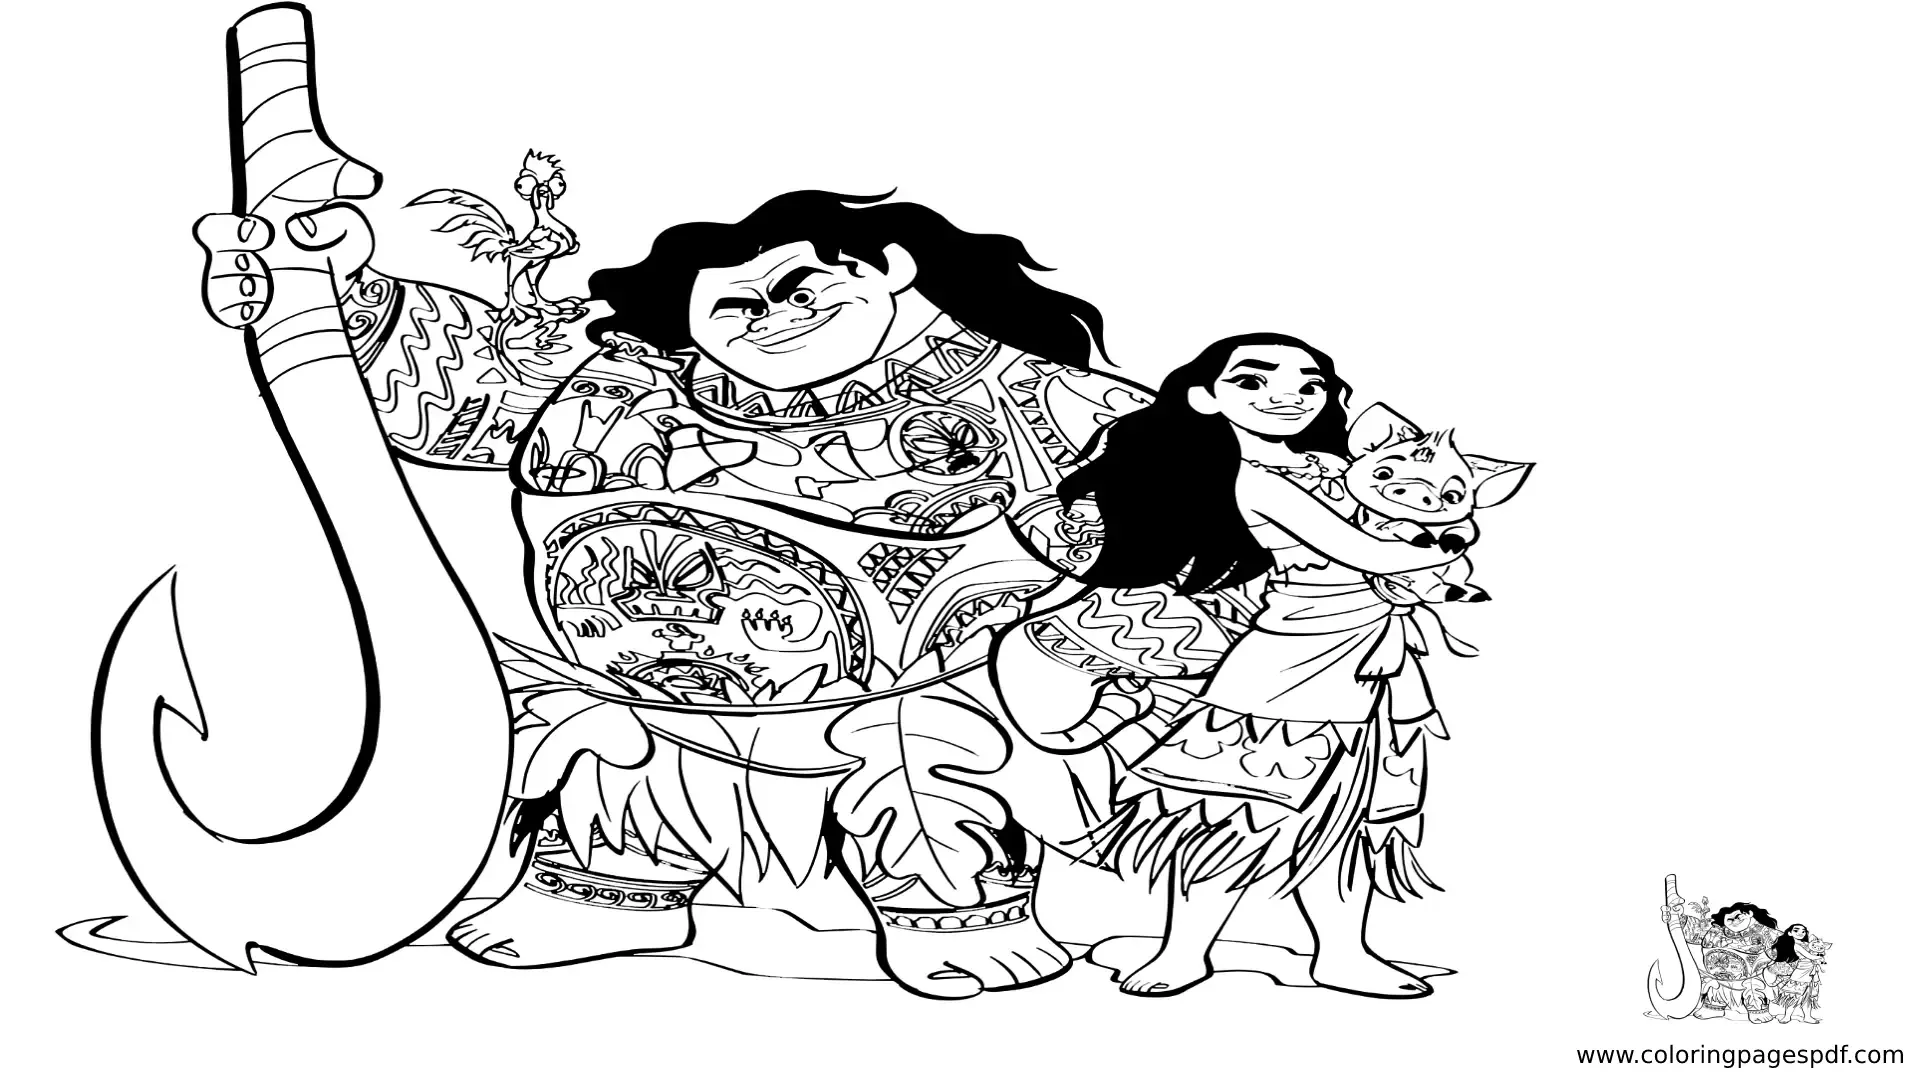 Coloring Pages Of Moana, Maul, And Pua